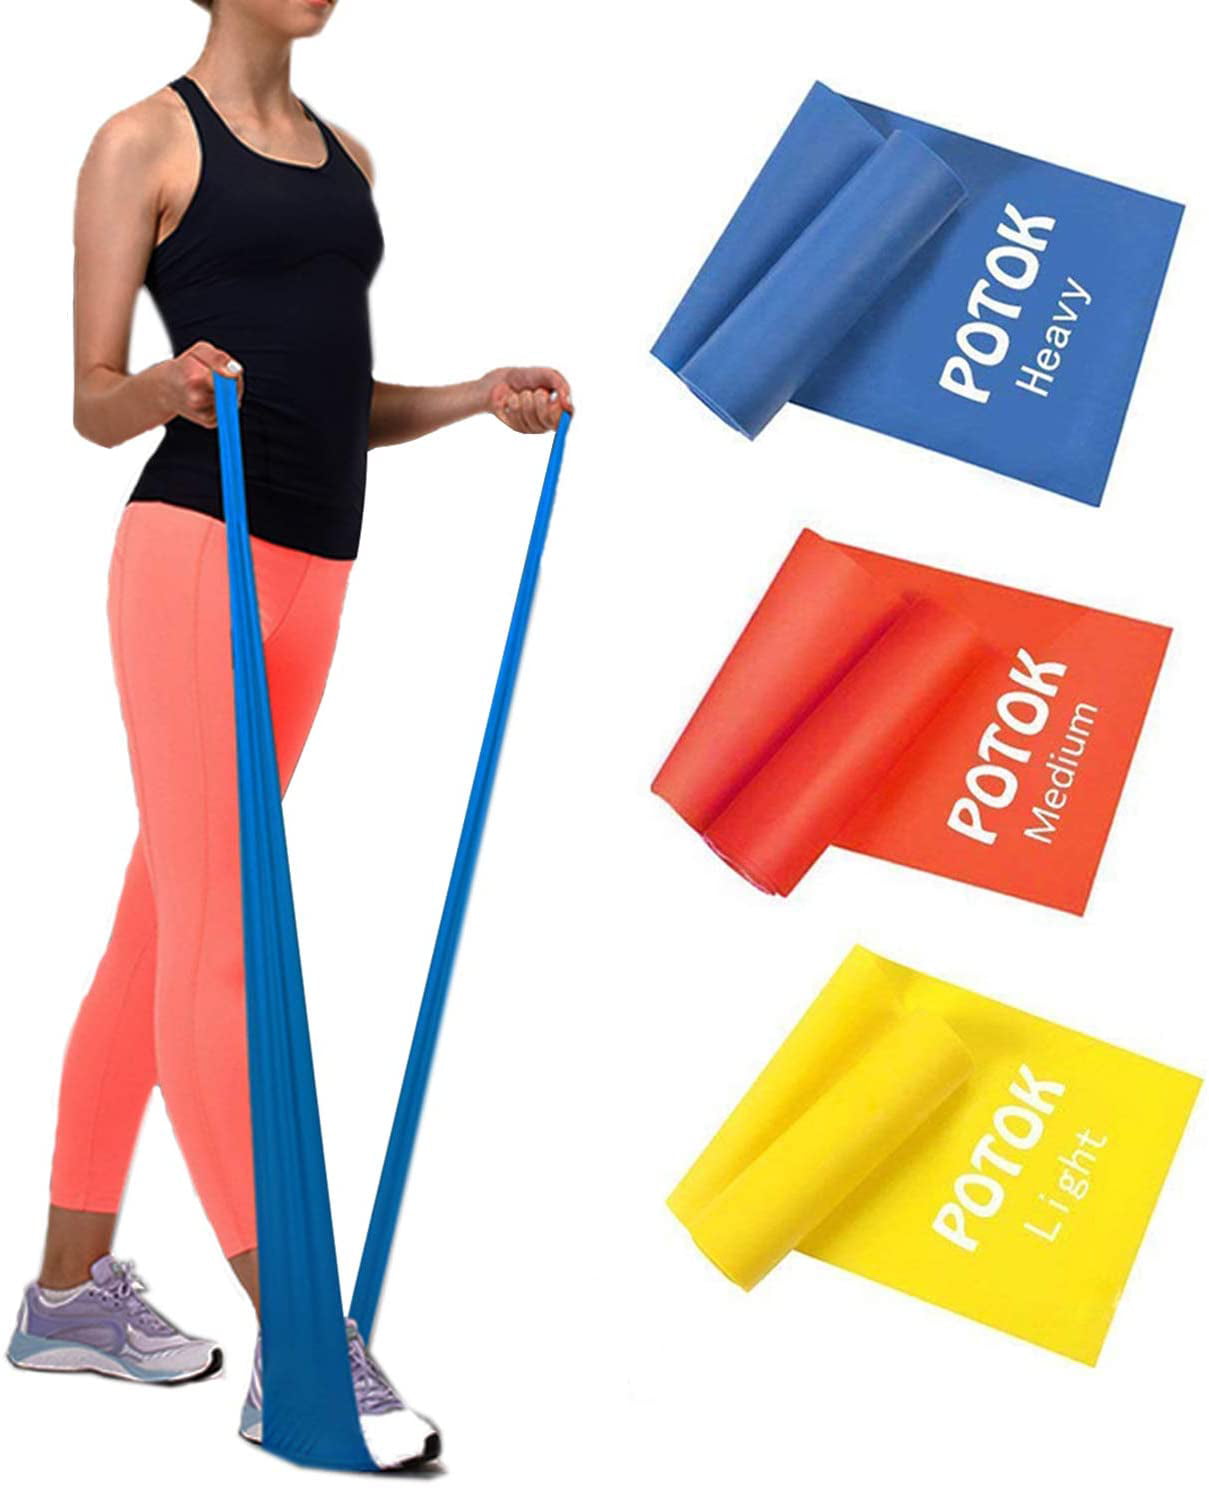 LATEX EXCERCISE GLUTES YOGA PILATES HOME GYM RESISTANCE BANDS SET OR SINGLES 